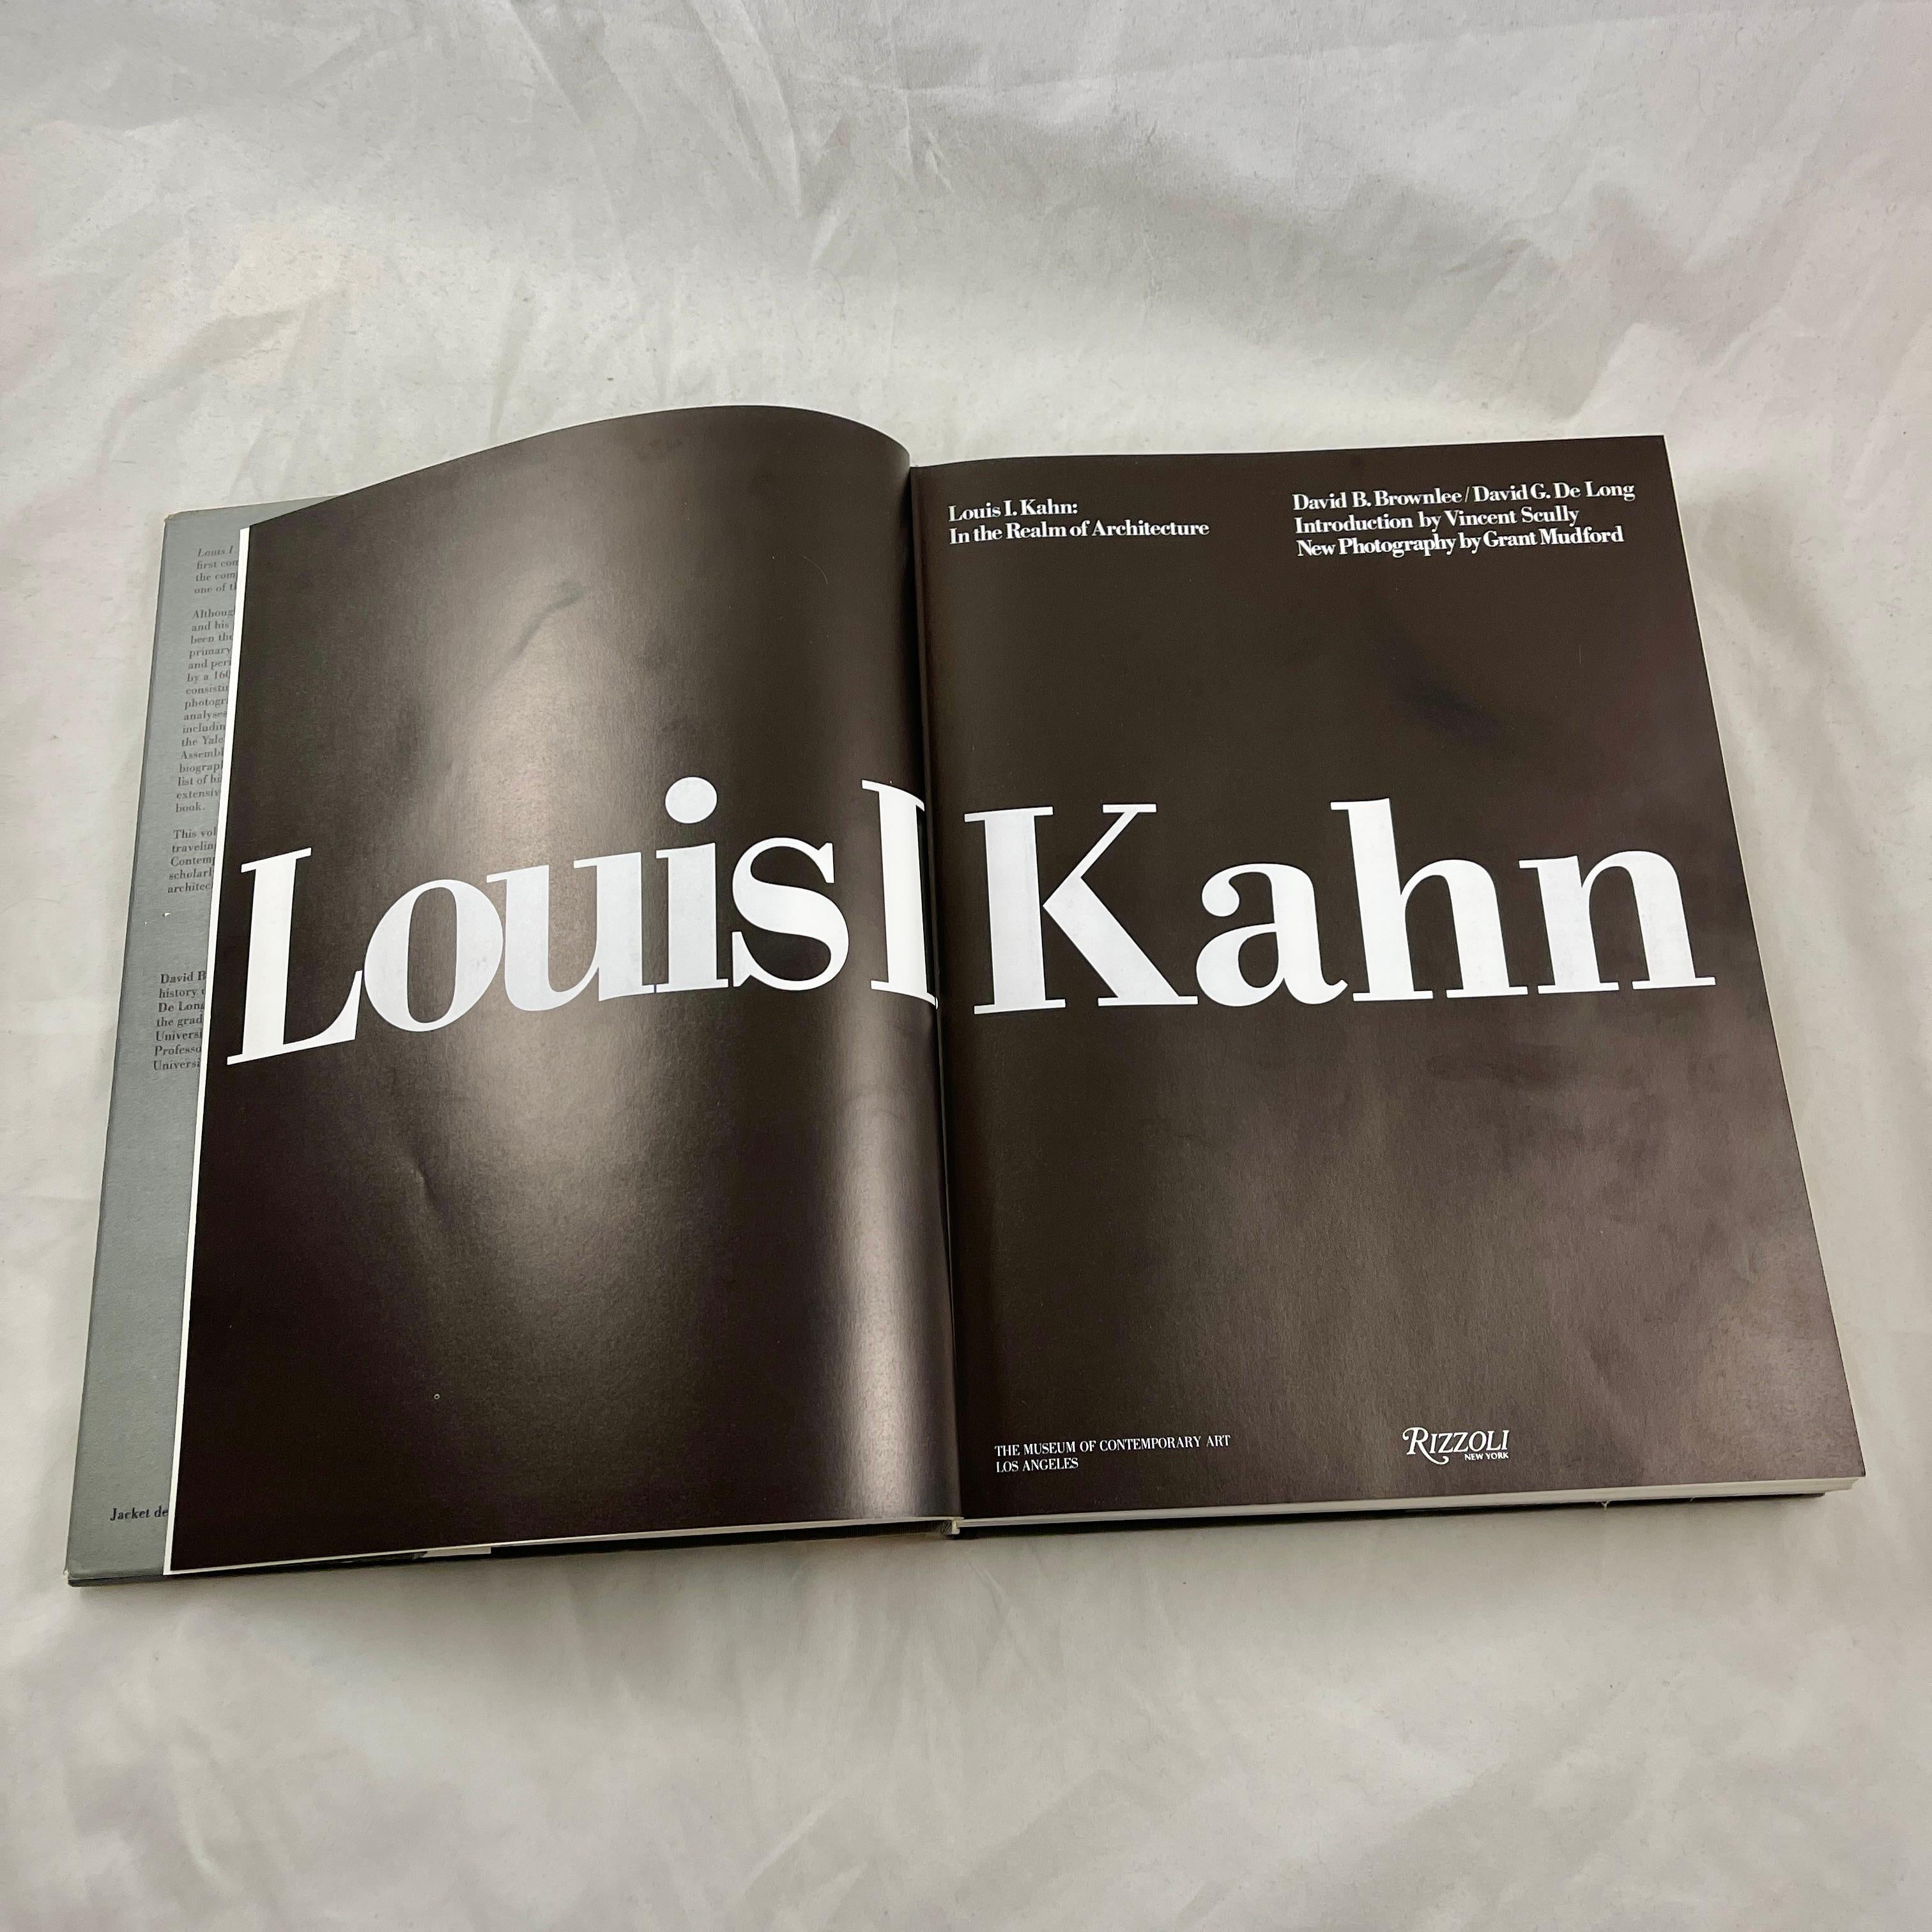 Louis I. Kahn: In the Realm of Architecture – 1st Edition, 1991

Louis I. Kahn is considered one of the 20th century’s greatest architects and teachers. This volume presents some of his most renowned buildings and projects, including the Salk